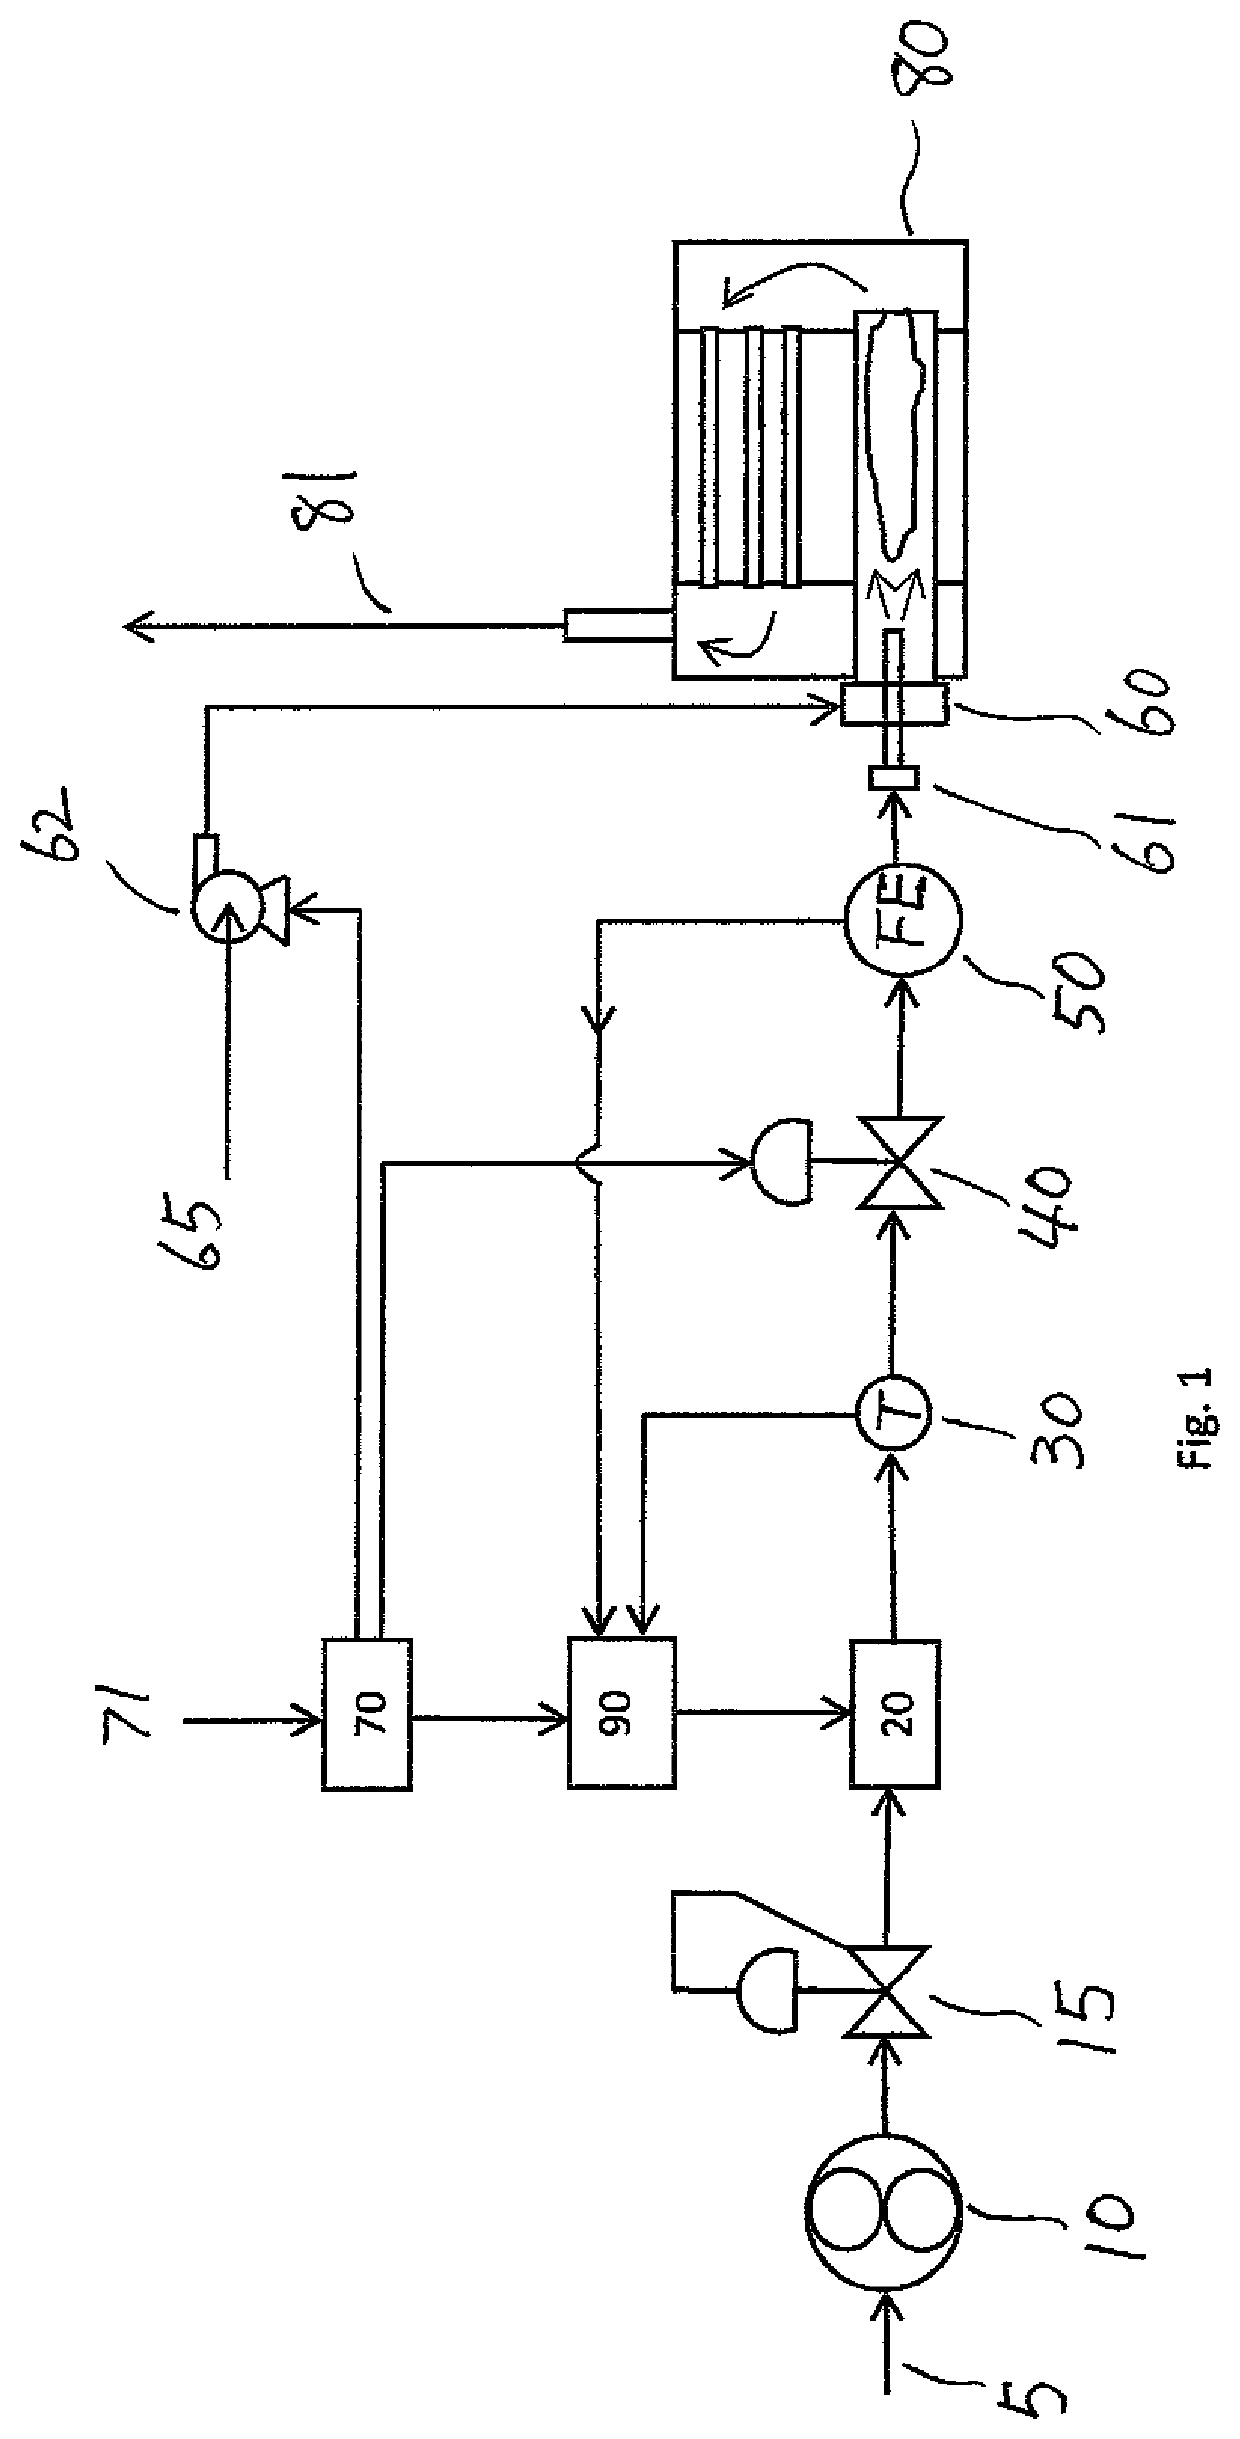 Apparatus for Oil Flow Control